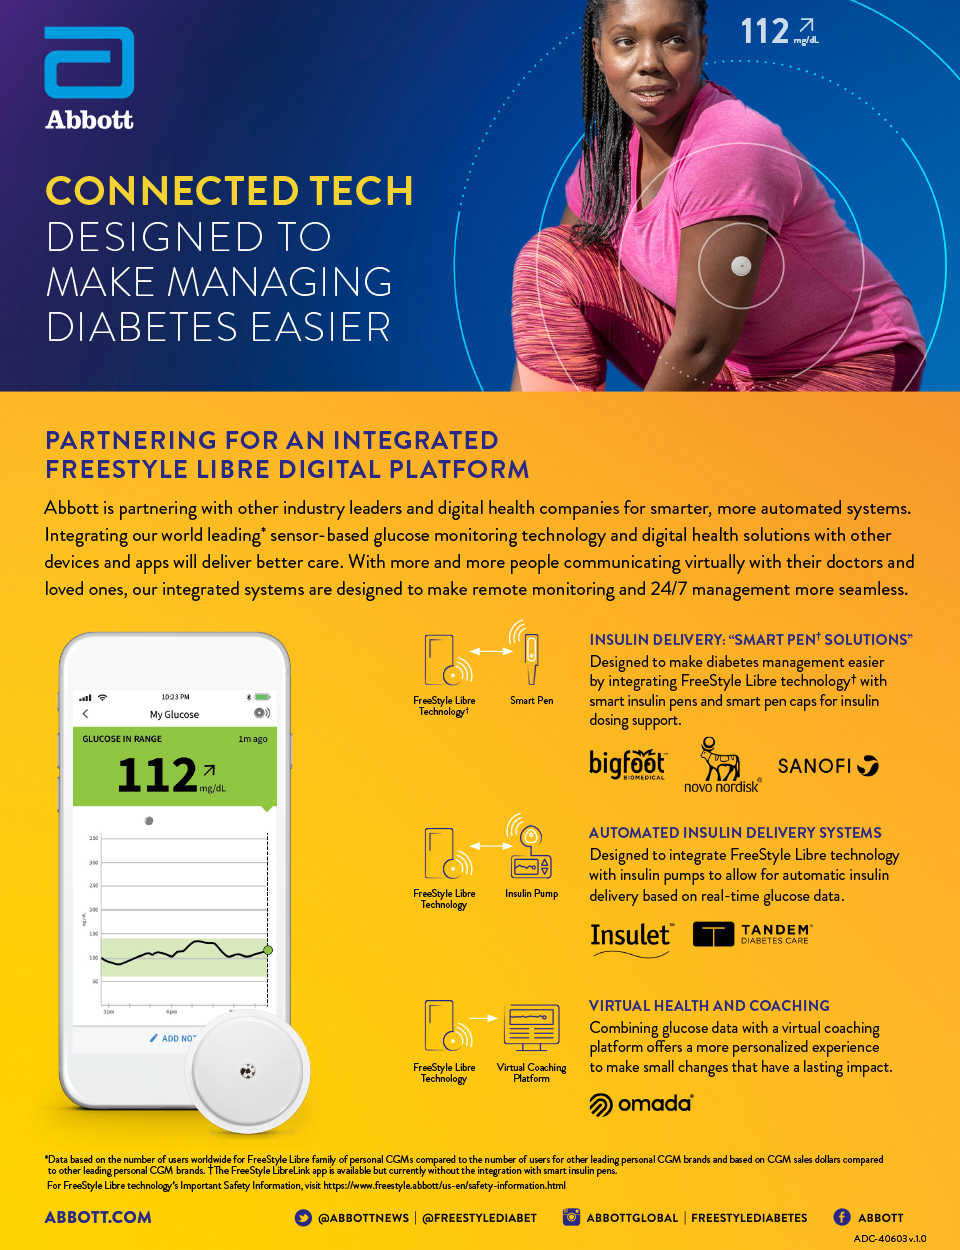 Connected Tech Designed to Make Managing Diabetes Easier